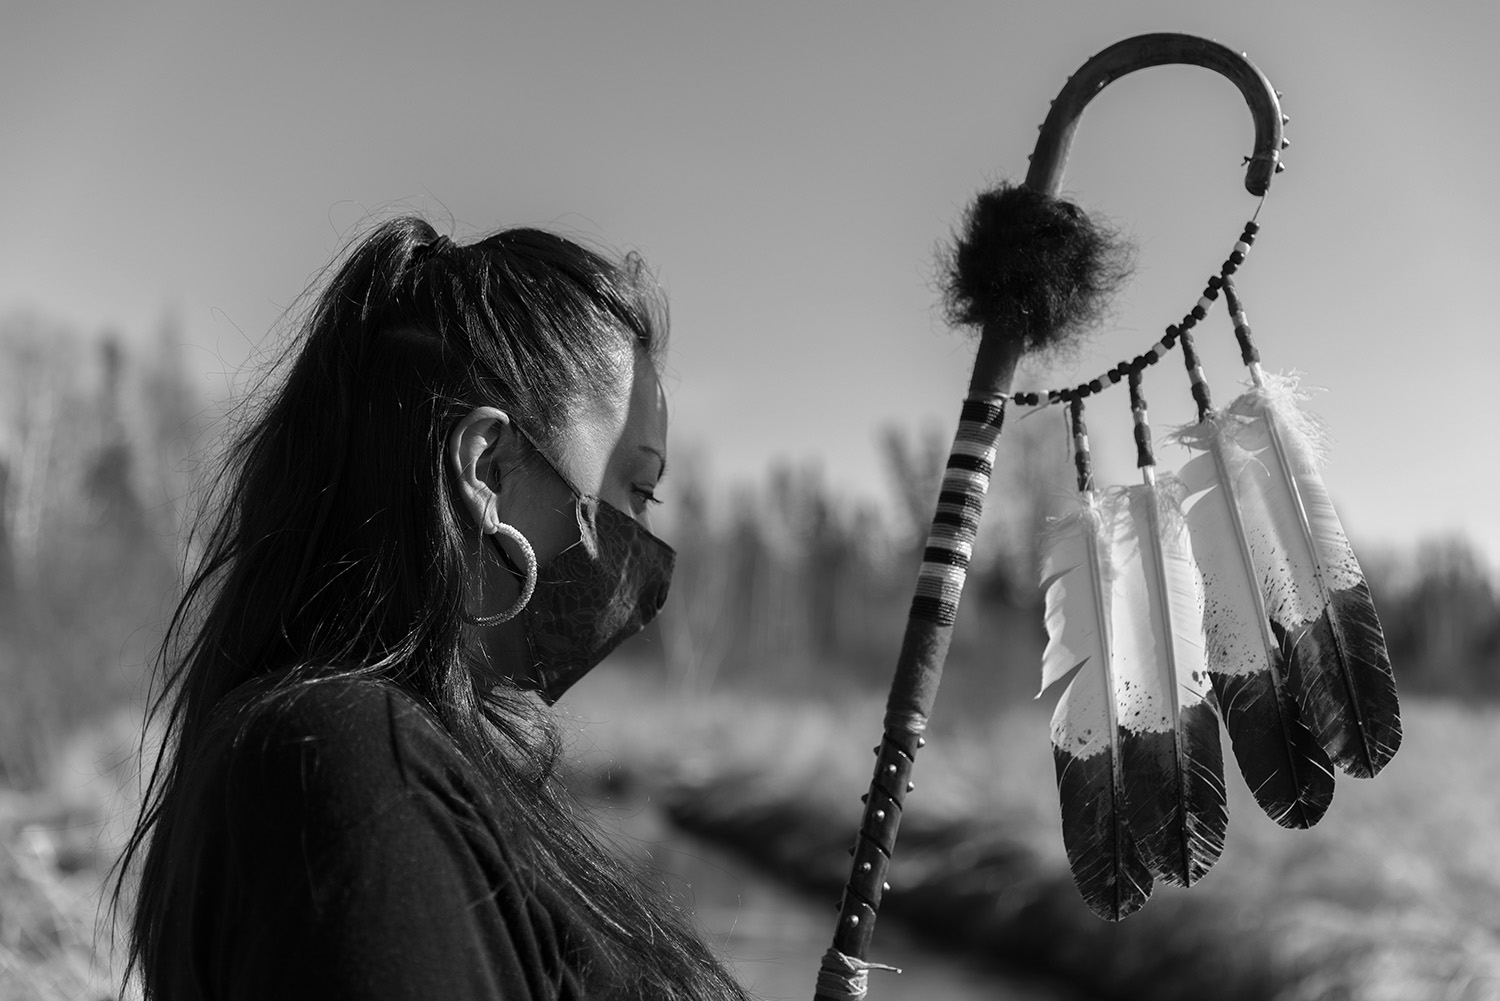 Sasha Beaulieu during a World Water Day rally at the headwaters of the Mississippi River in Northern Minnesota on March 22nd, 2021.